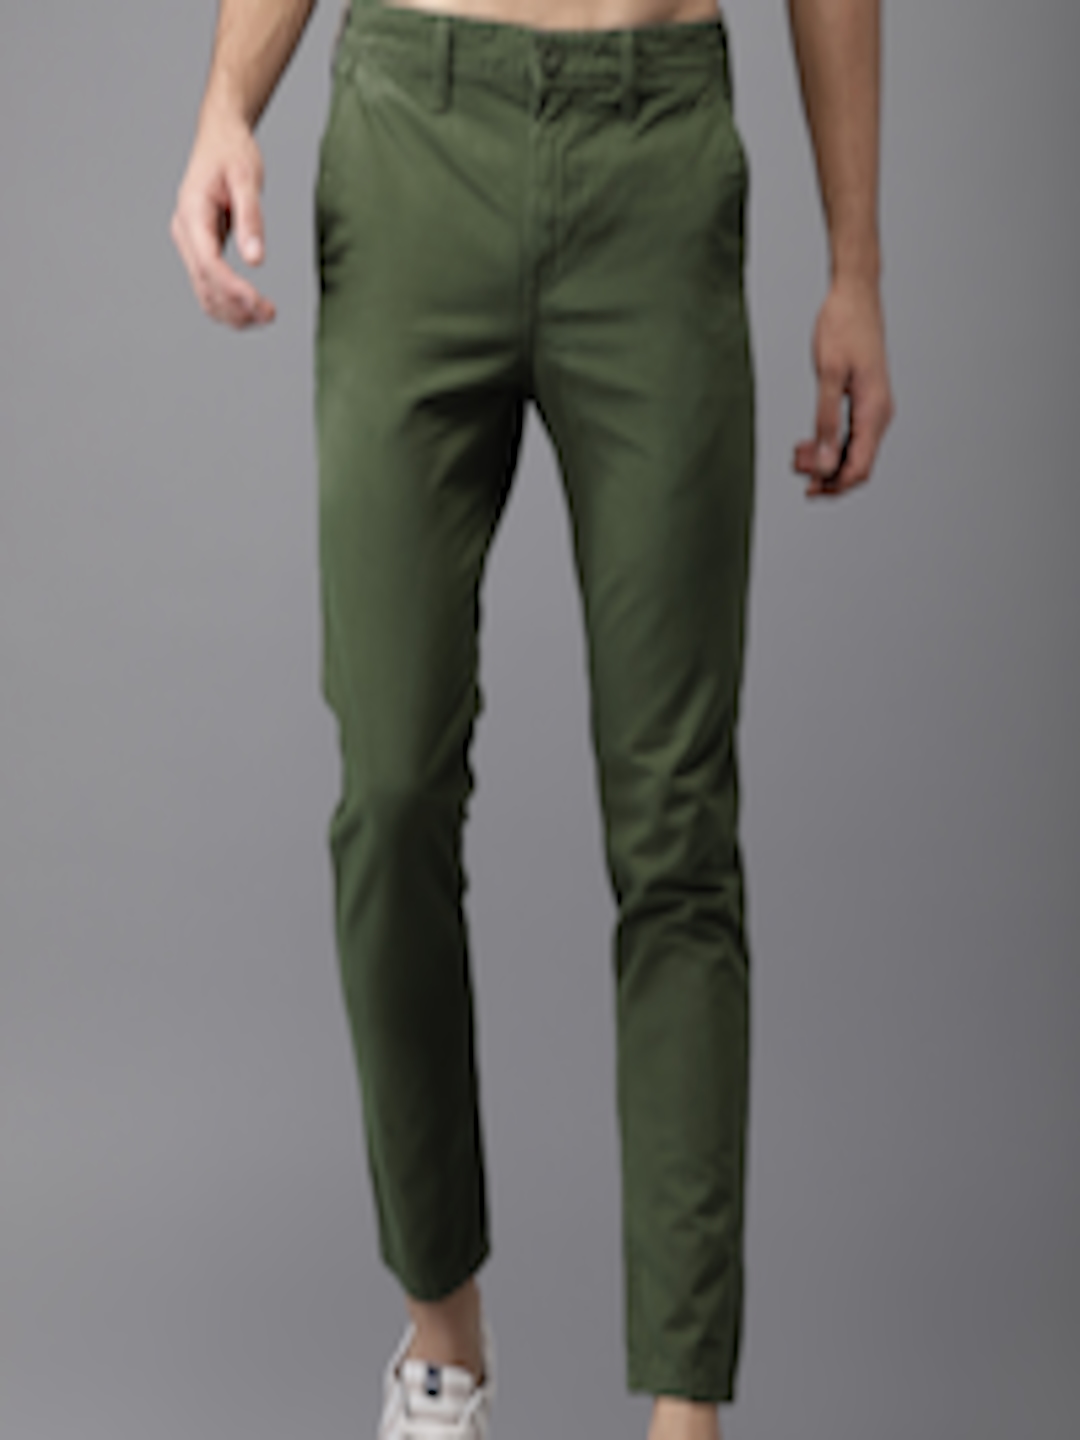 Buy HERE&NOW Men Olive Green Slim Fit Solid Cropped Chinos - Trousers ...